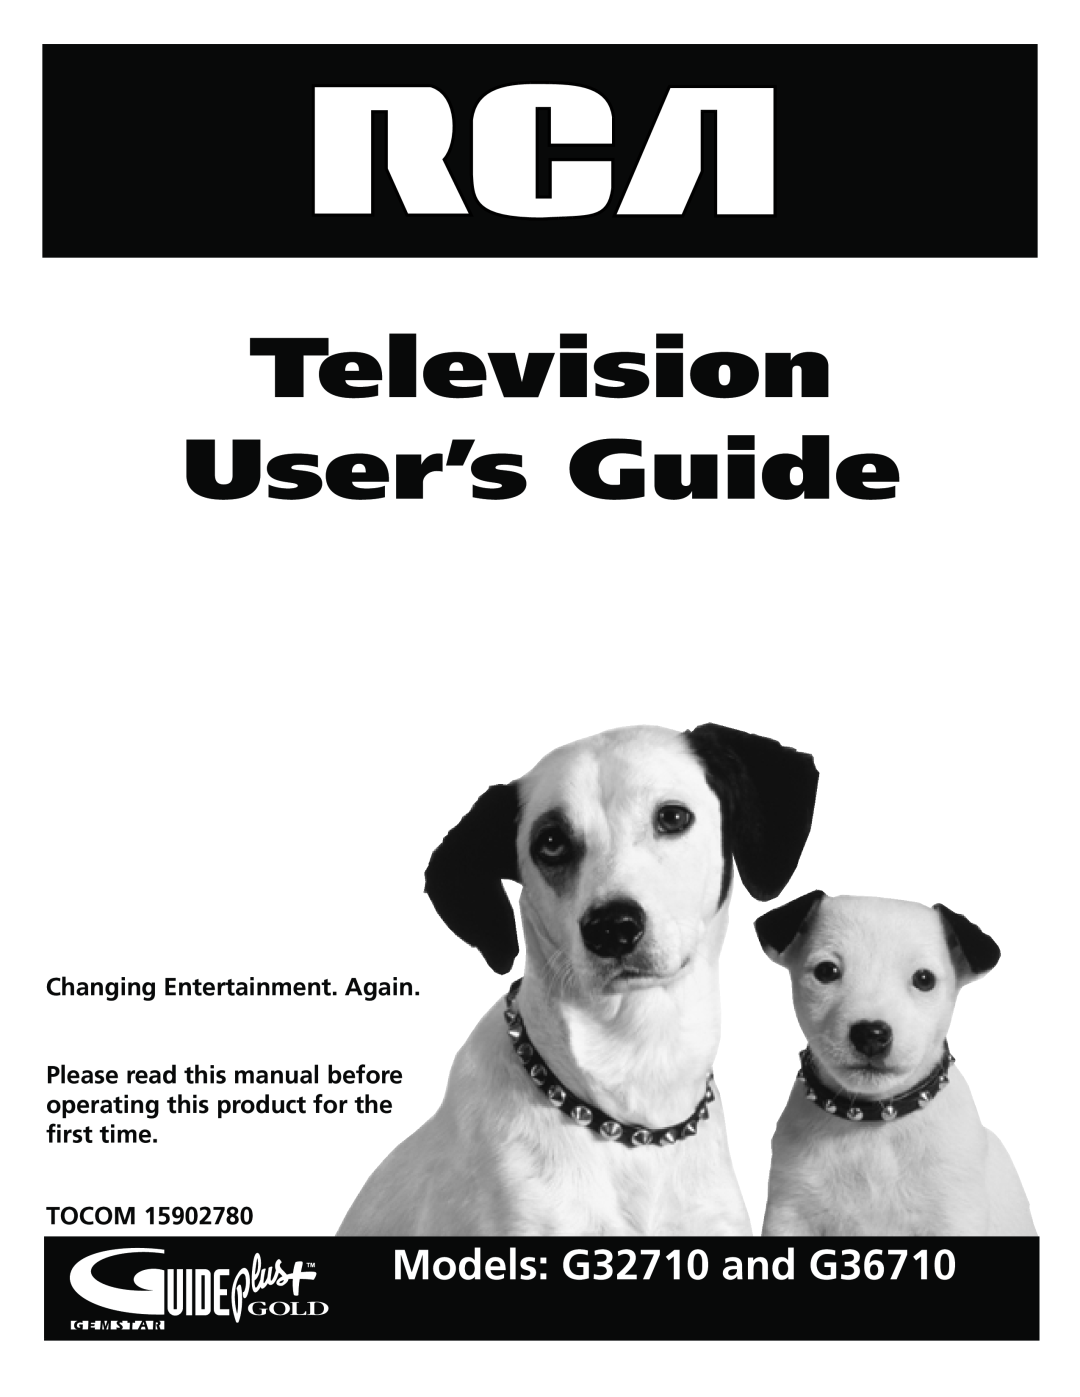 RCA manual Television User’s Guide, Models G32710 and G36710, Changing Entertainment. Again, Tocom 